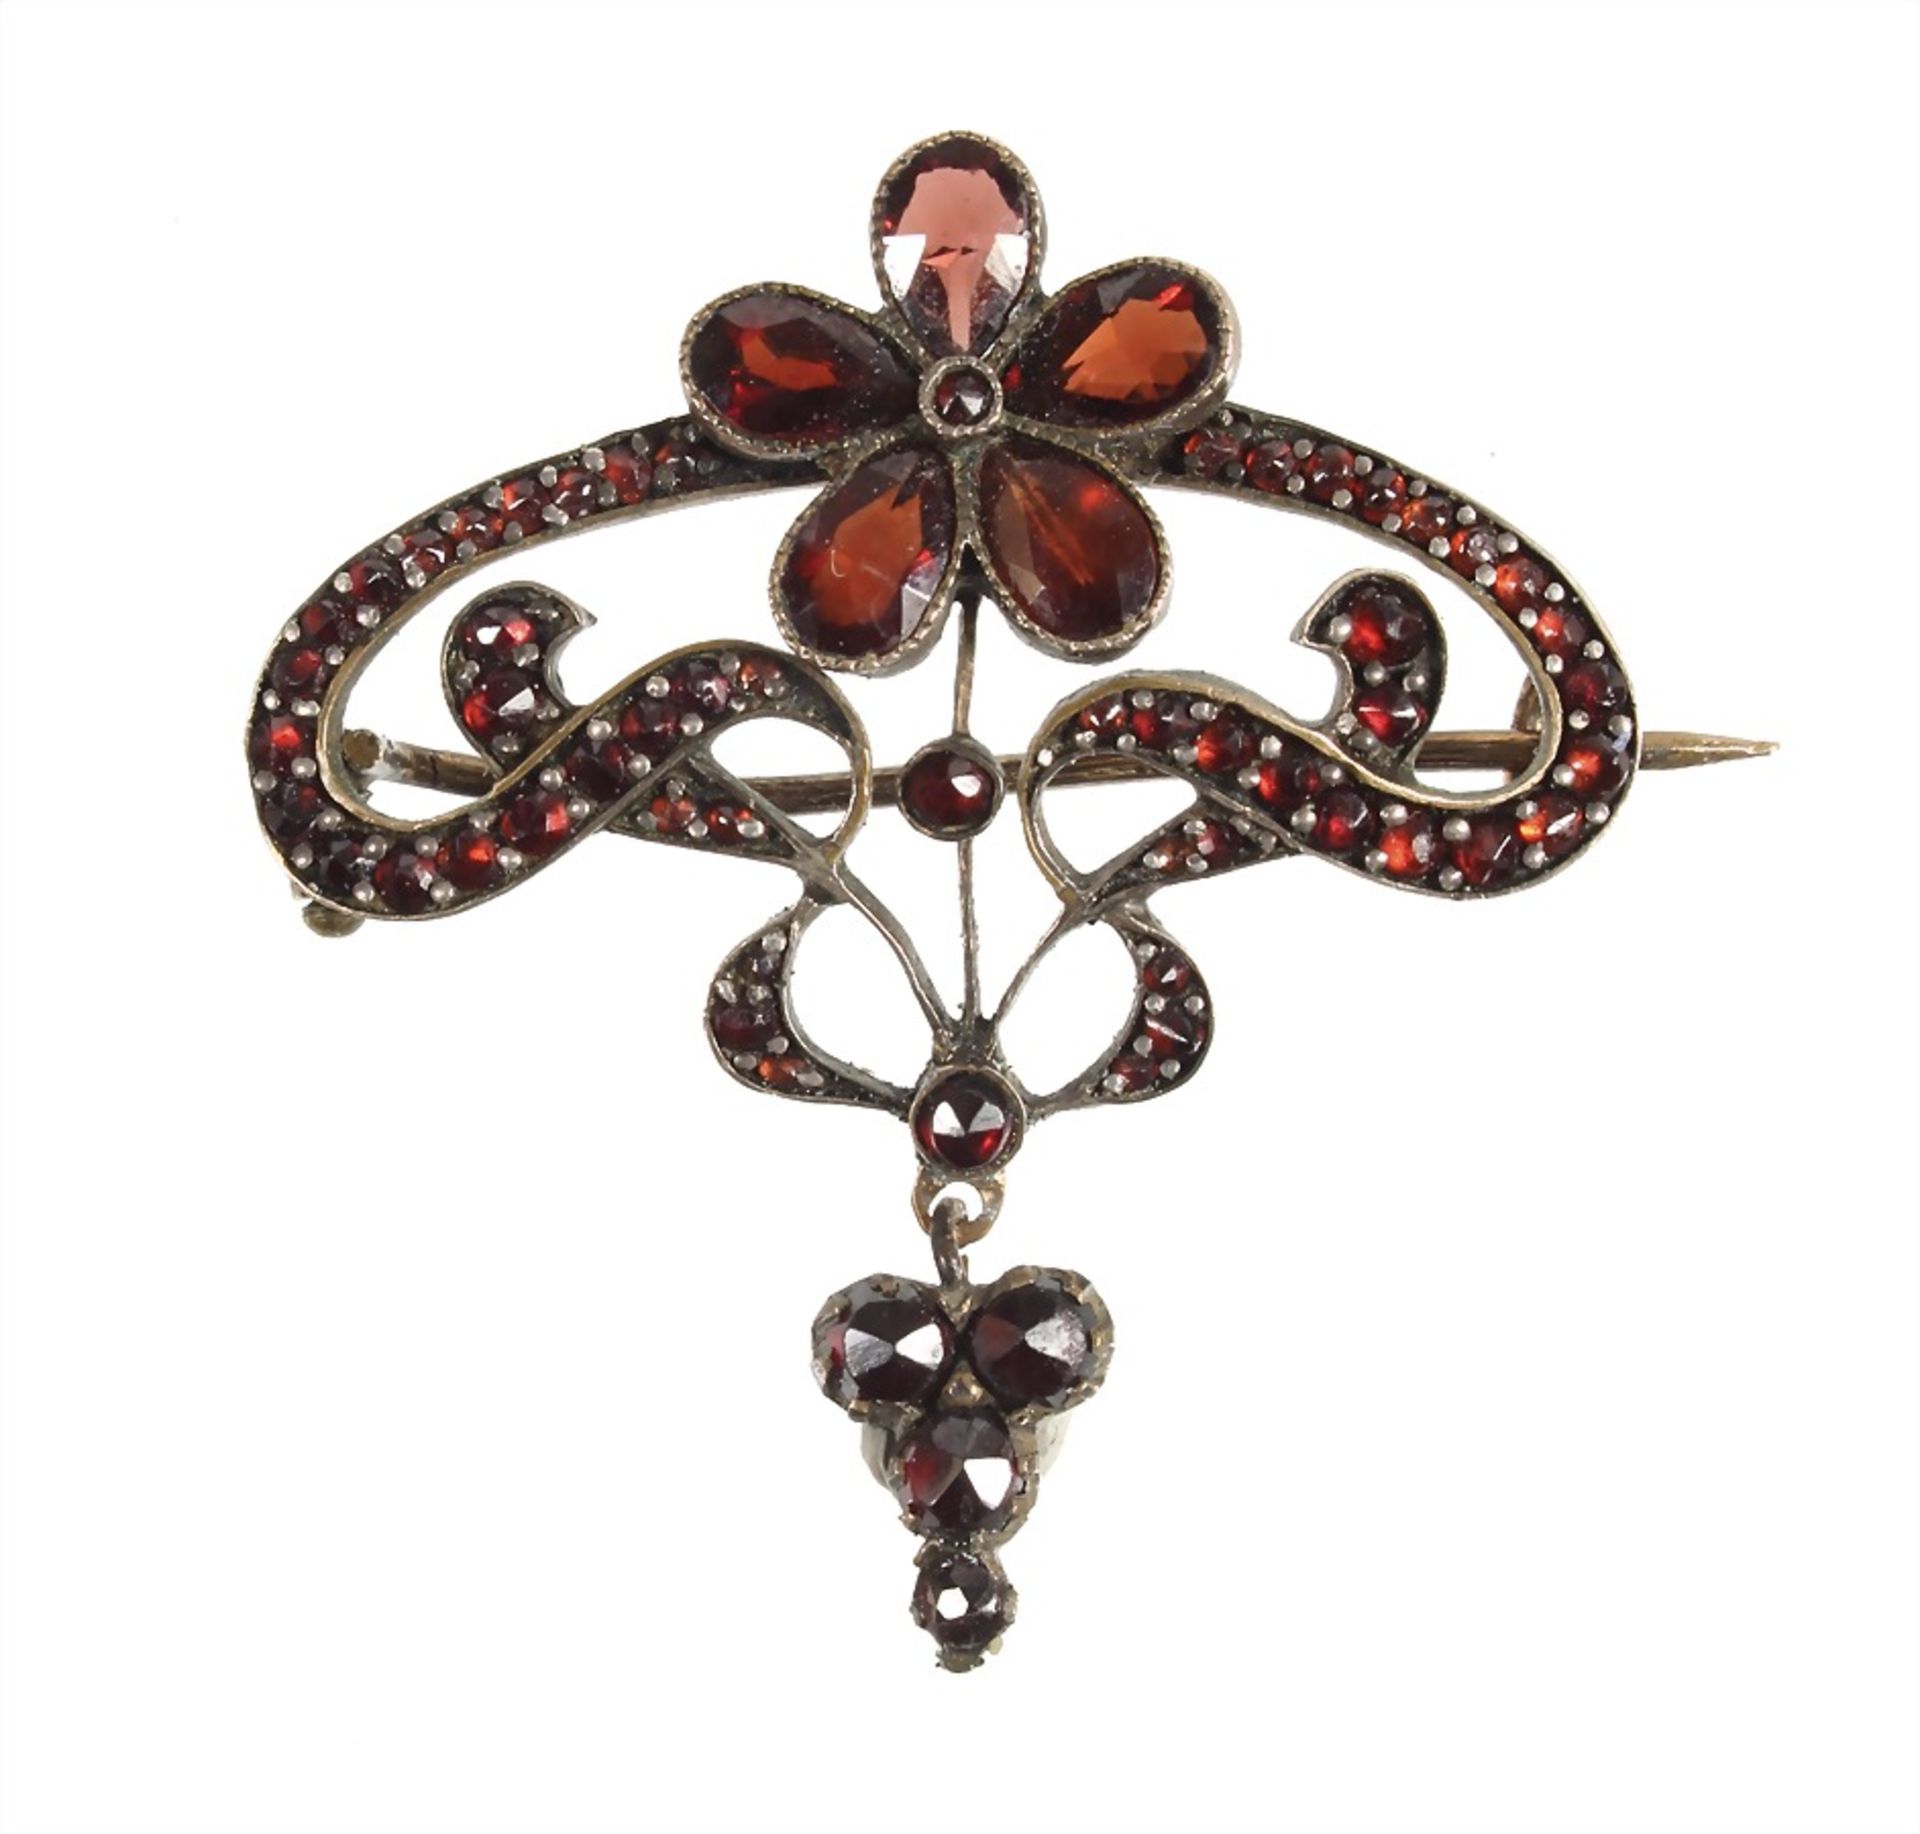 brooch art nouveau around 1900, gold filled, brooch complete paved with Bohemian garnet, a very